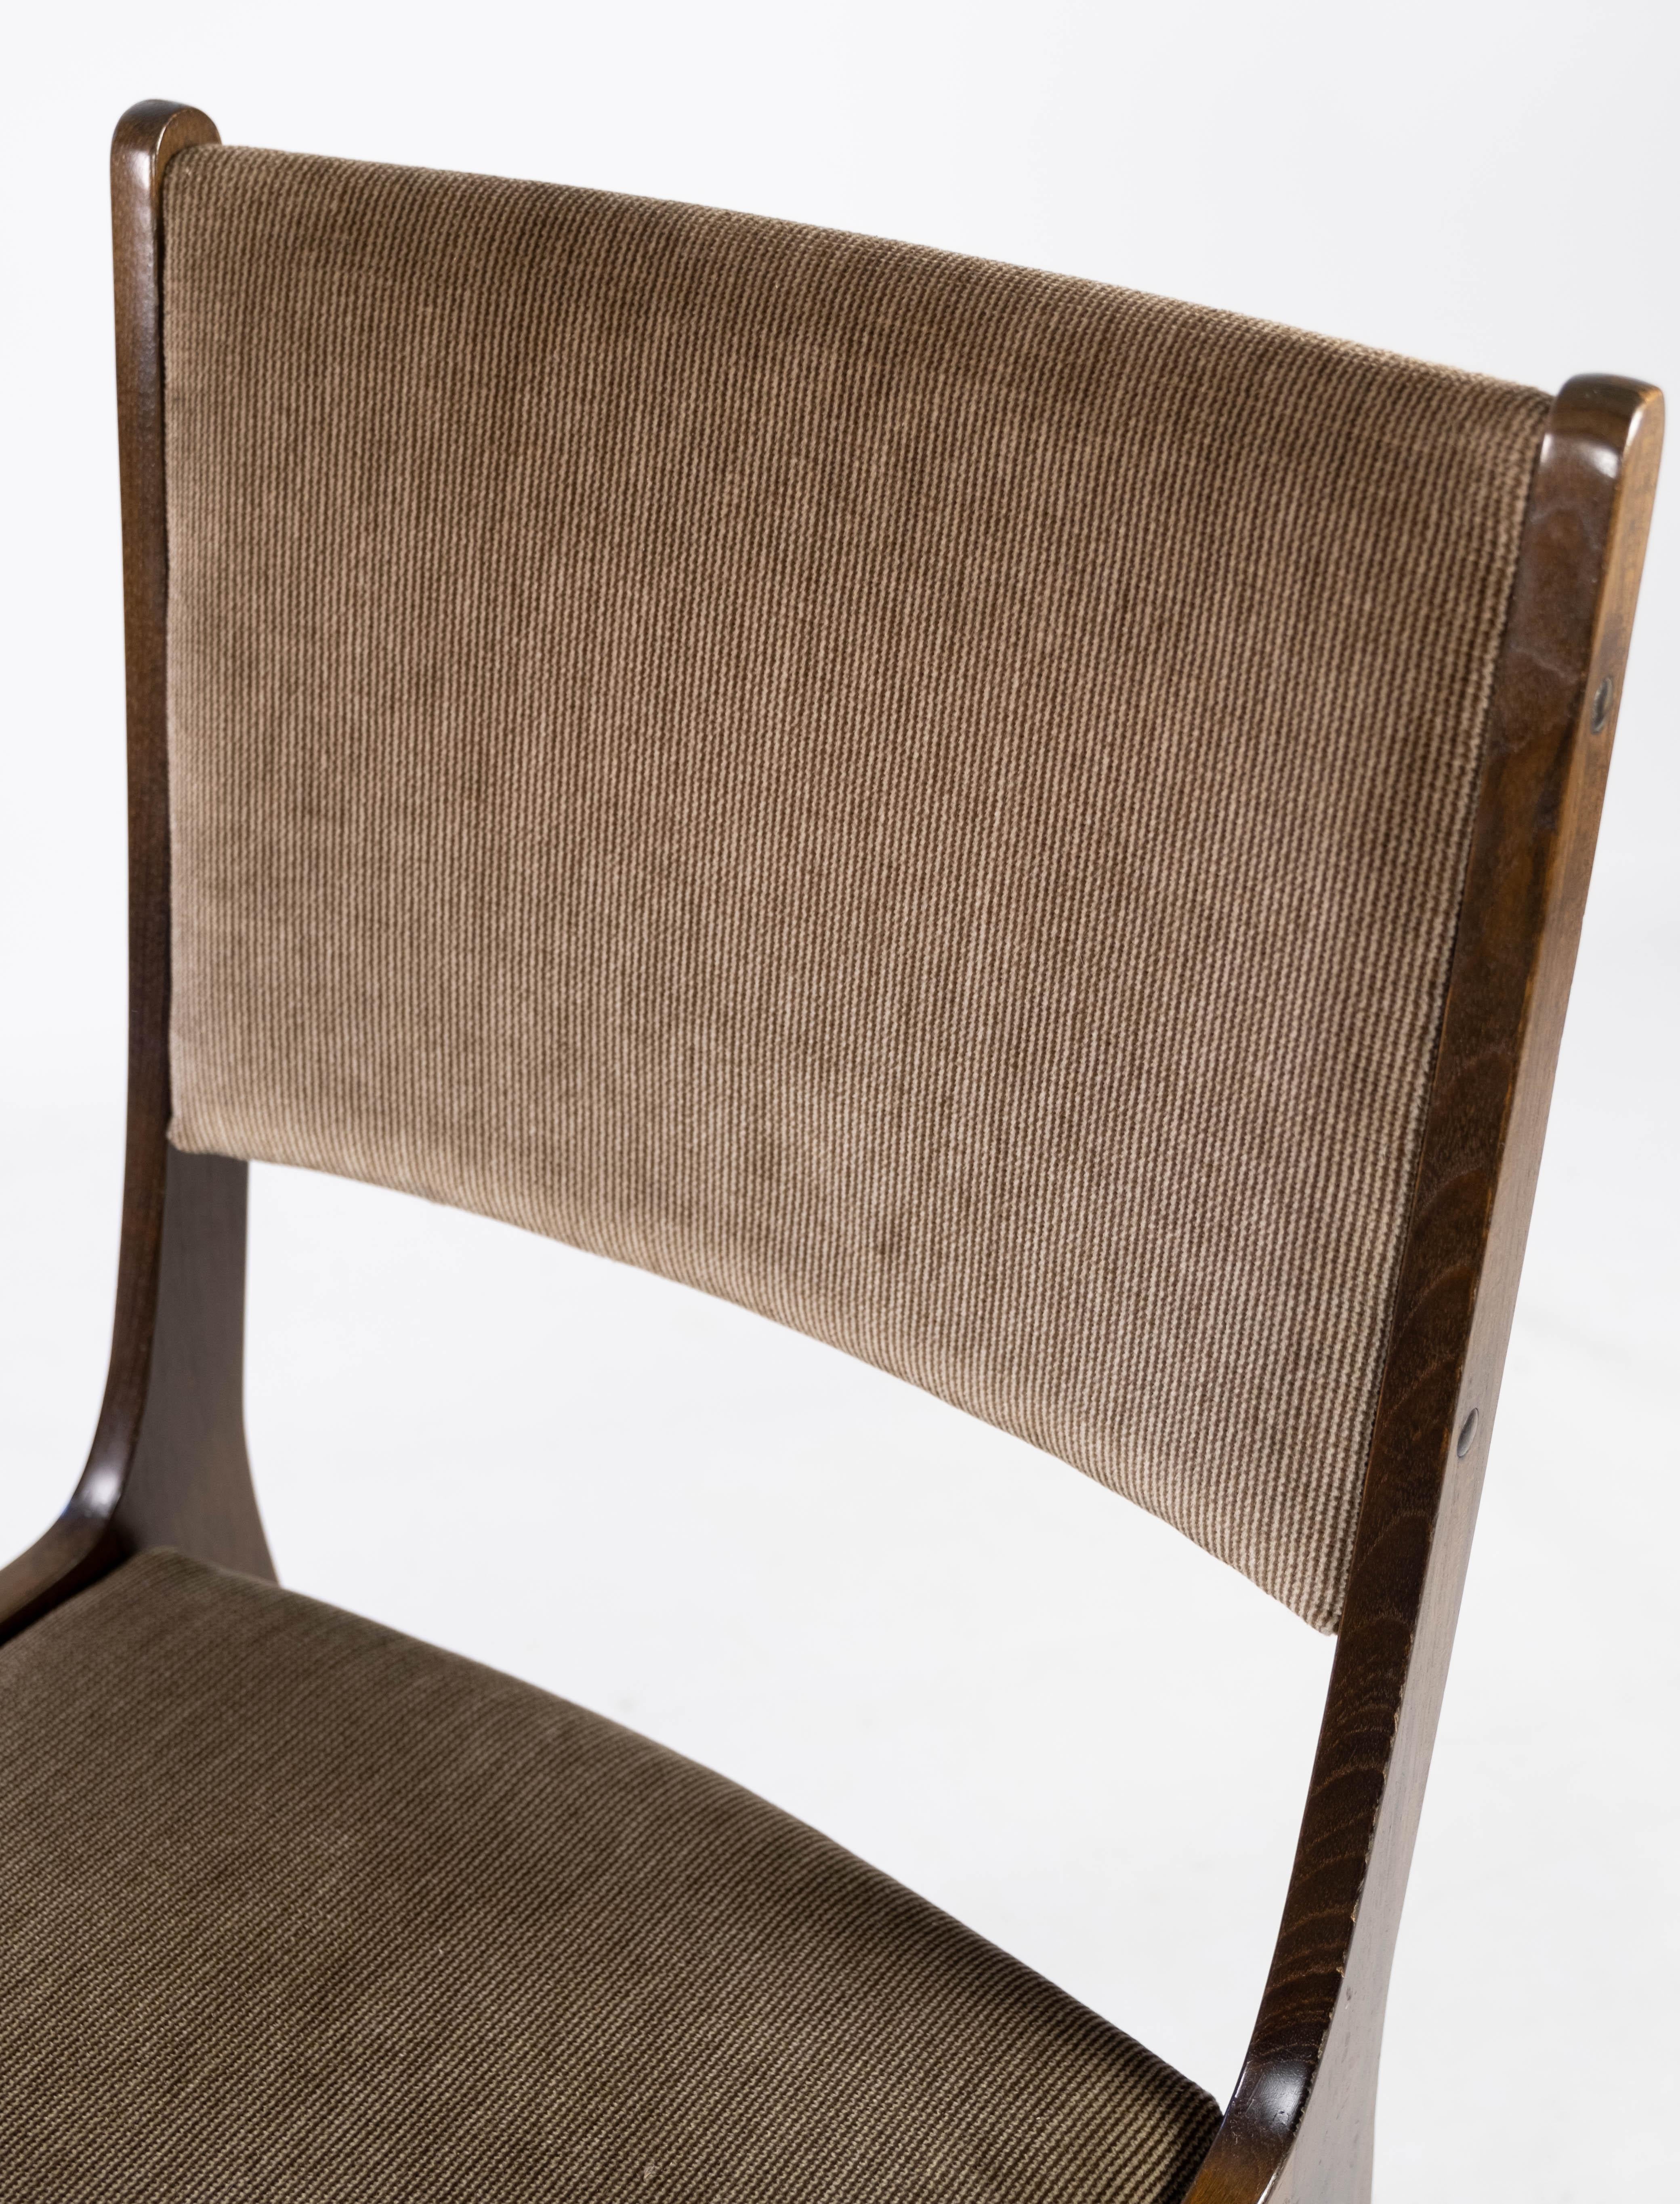 Set of Four Dining Room Chairs in Dark Wood of Danish Design by Faarstrup, 1960s For Sale 3